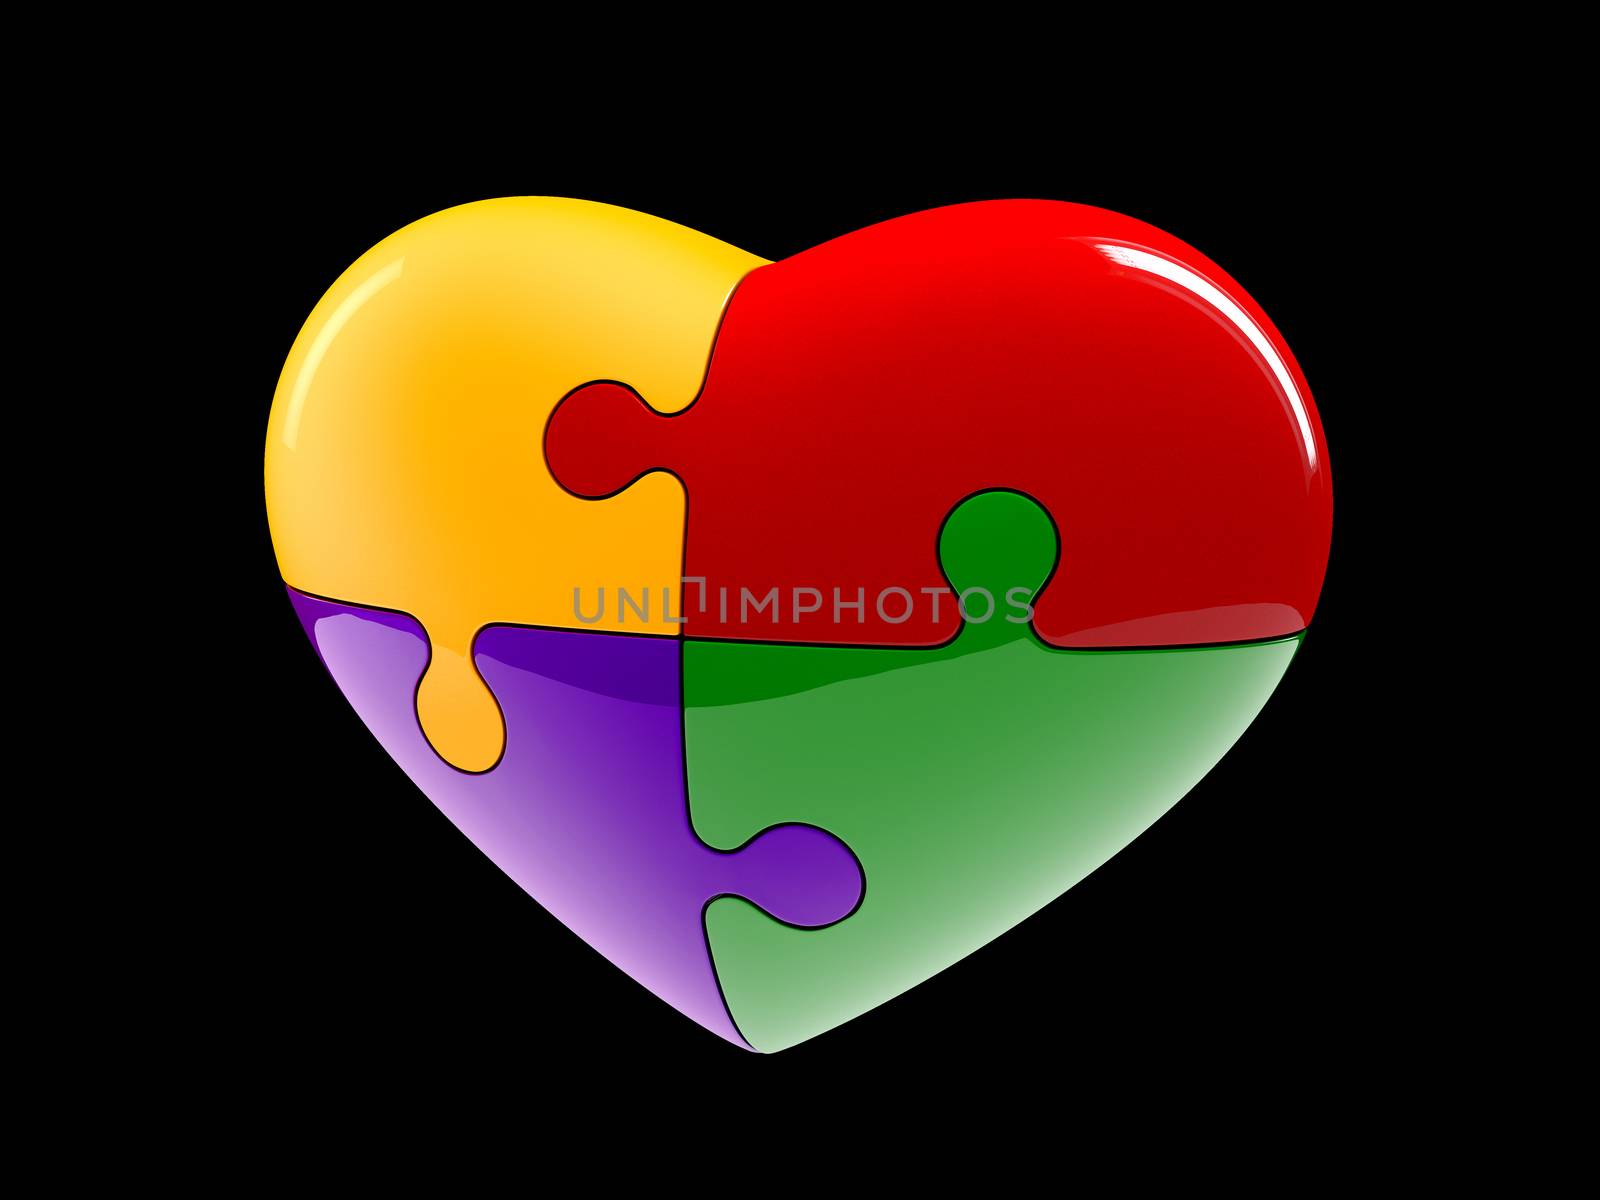 4 part jigsaw puzzle heart diagram 3d illustration isolated on black background by tussik